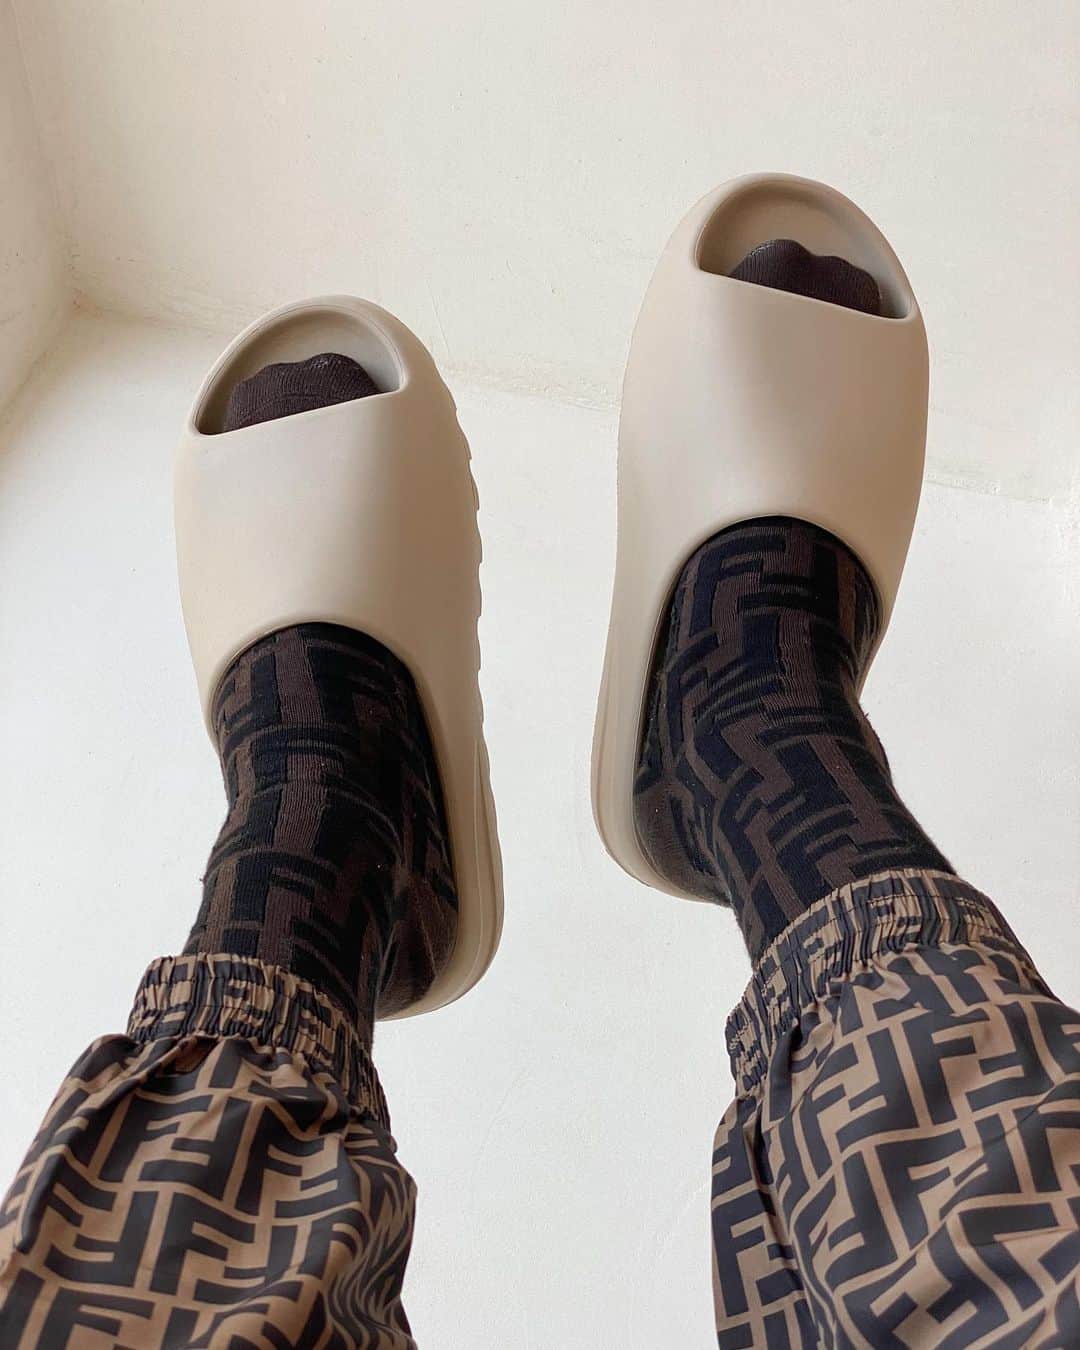 New arrival Intact Intuition How You Can Spot Fake Yeezy Slides (2022 Update) - Legit Check By Ch